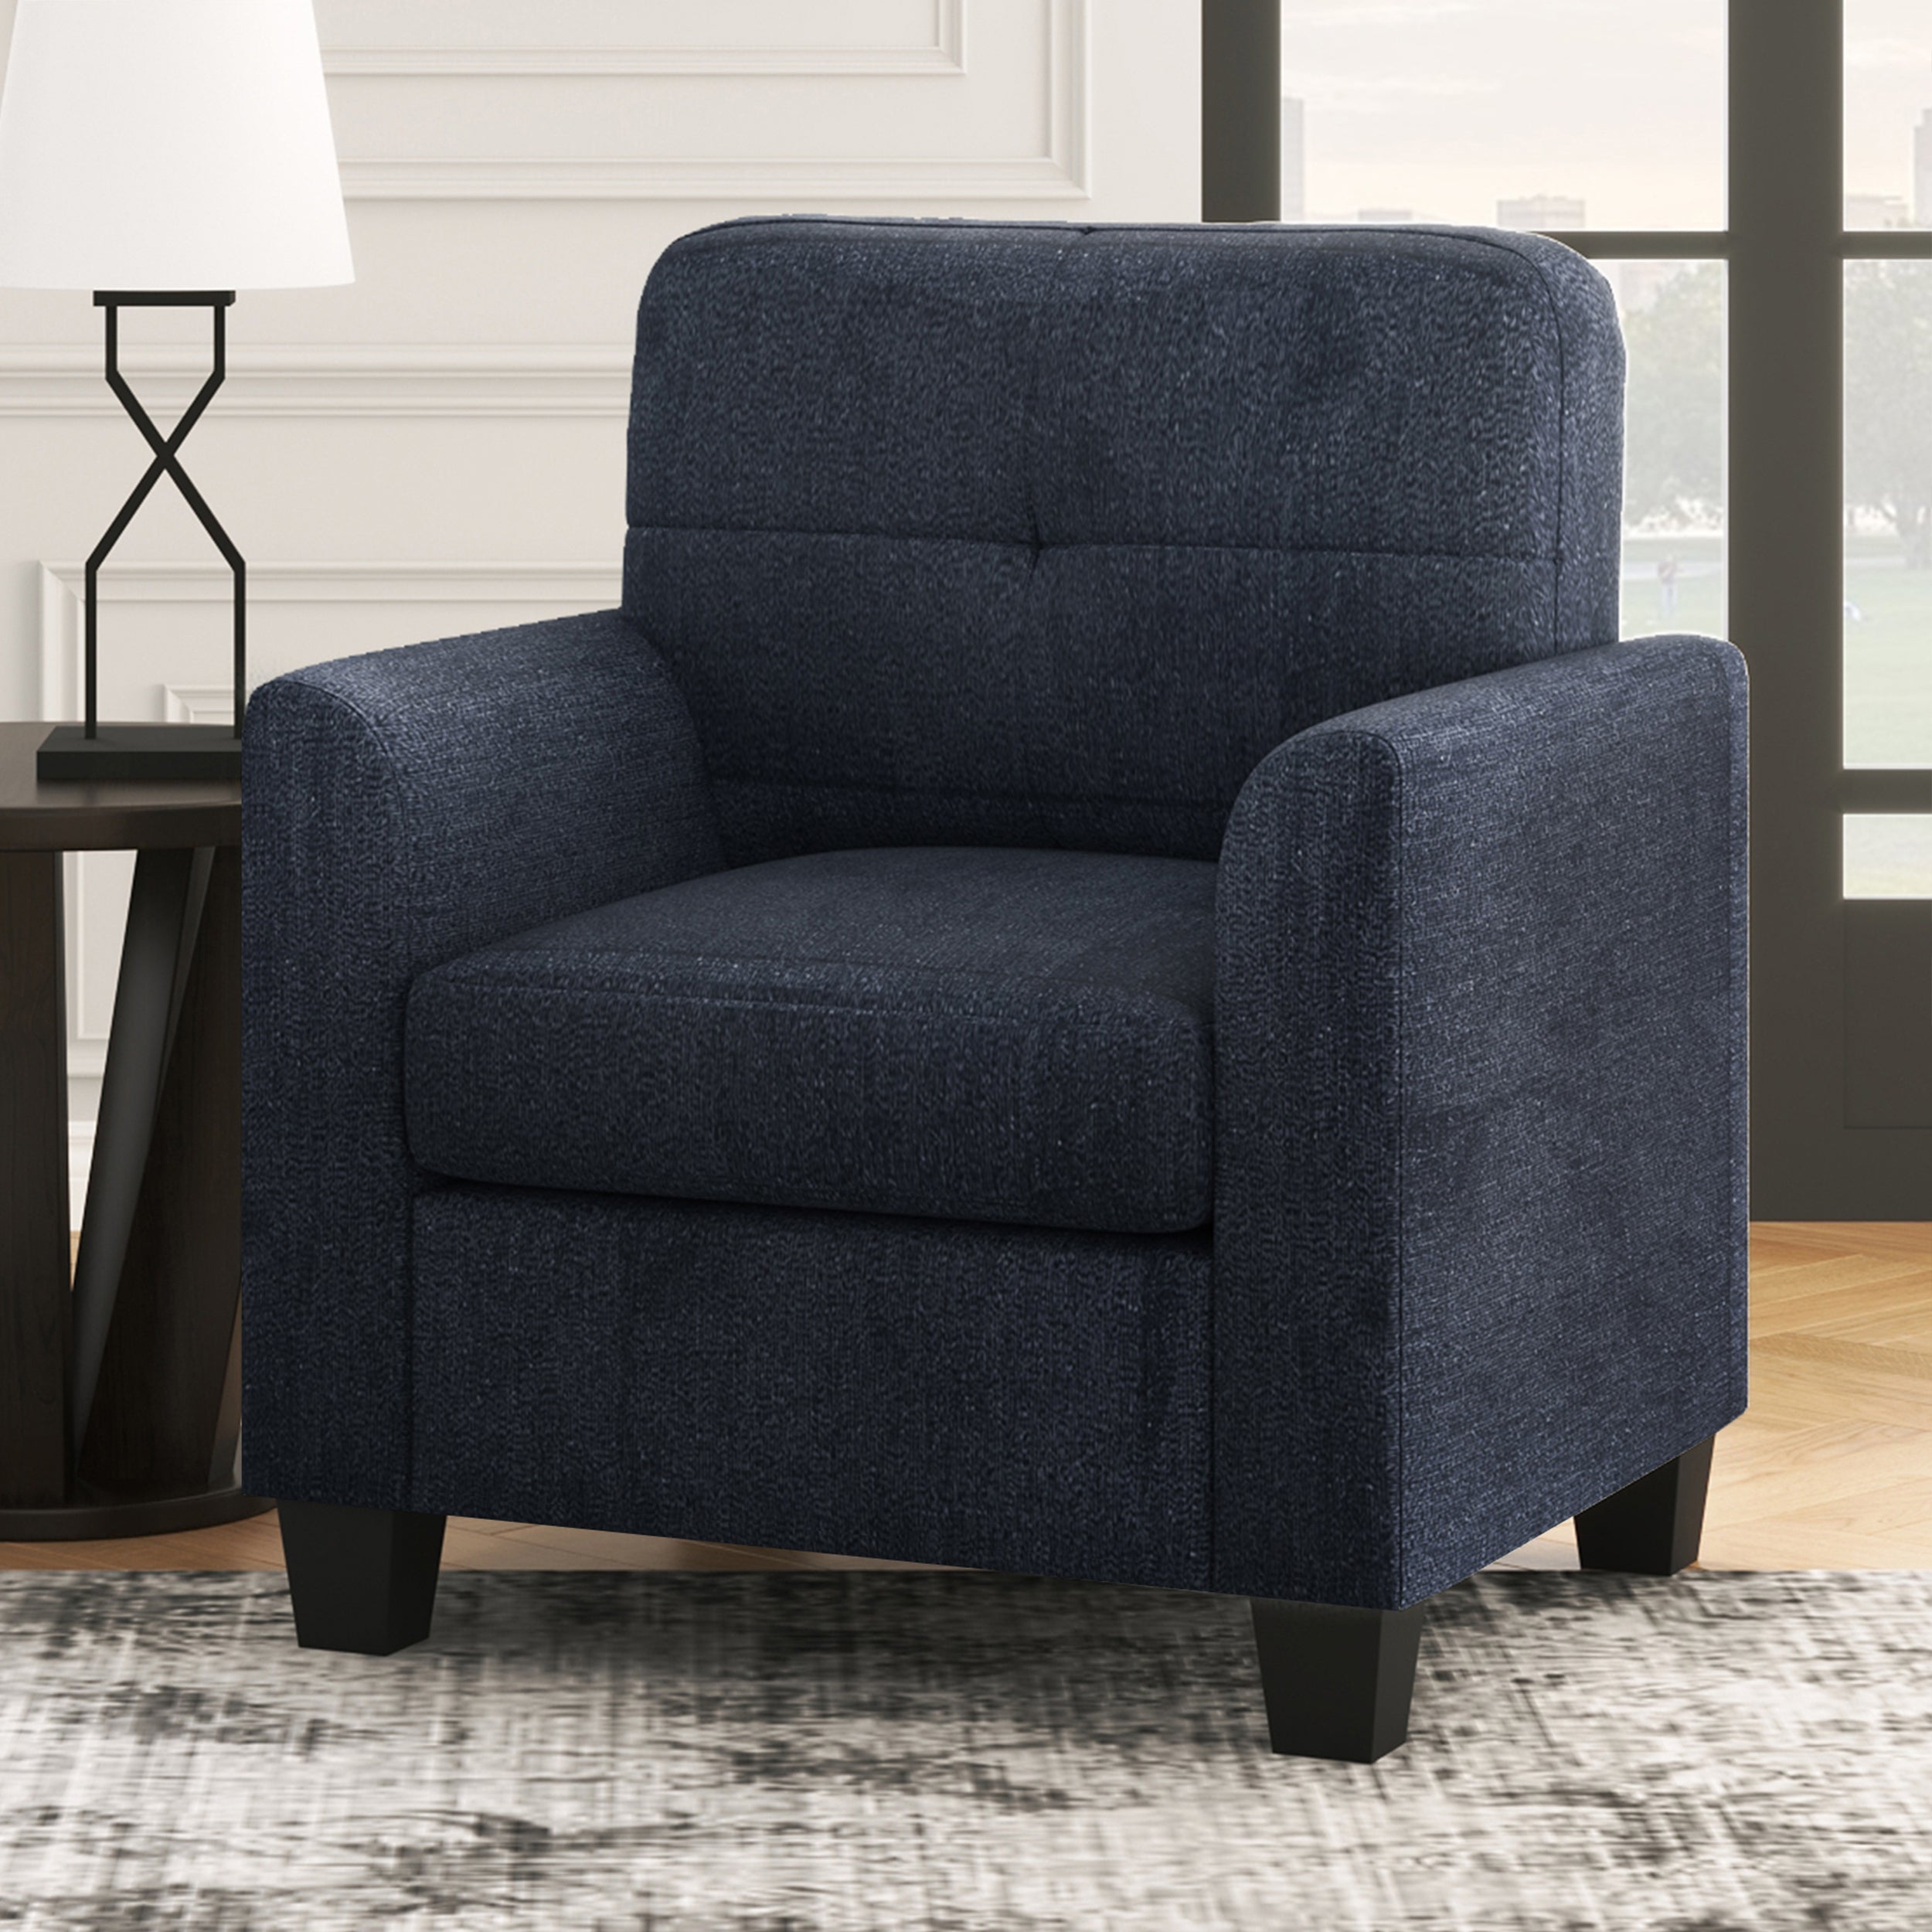 🆓🚛 Mid Century Modern Accent Chair Cozy Armchair Button Tufted Back and Wood Legs for Living Room, Office Room, Dark Blue